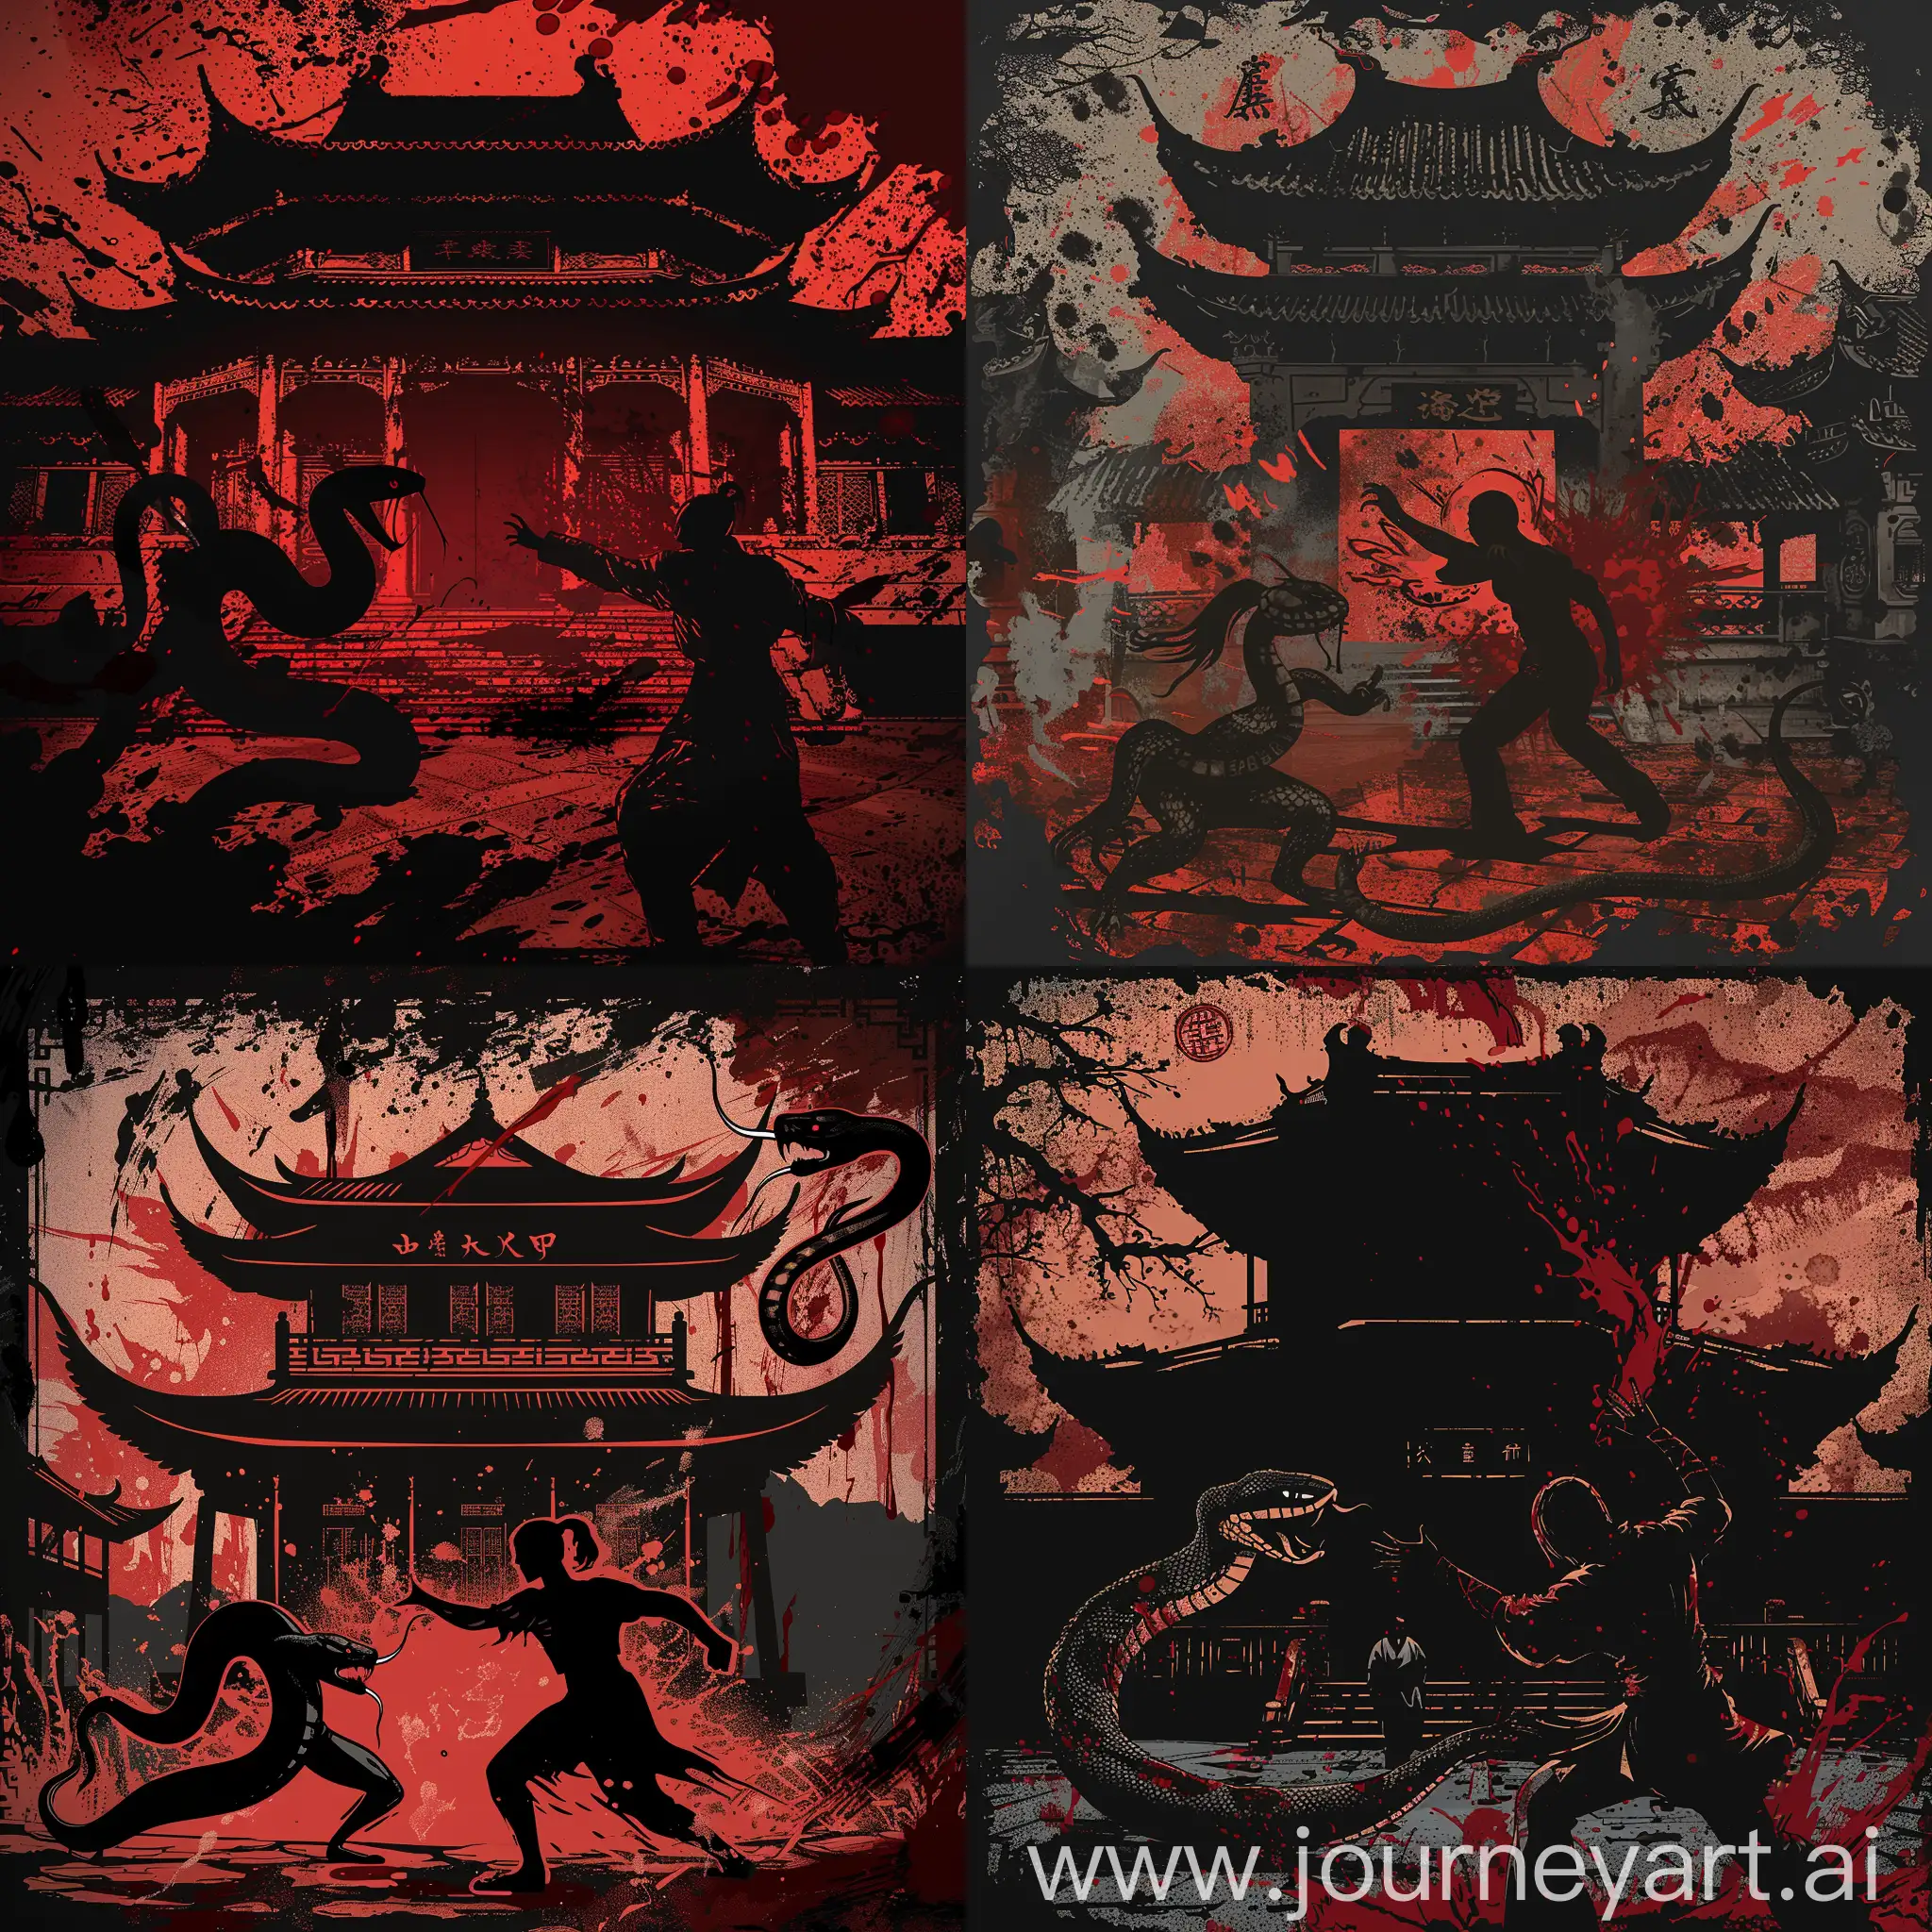 Taoist-Silhouette-and-Snake-Demon-Combat-at-Traditional-Temple